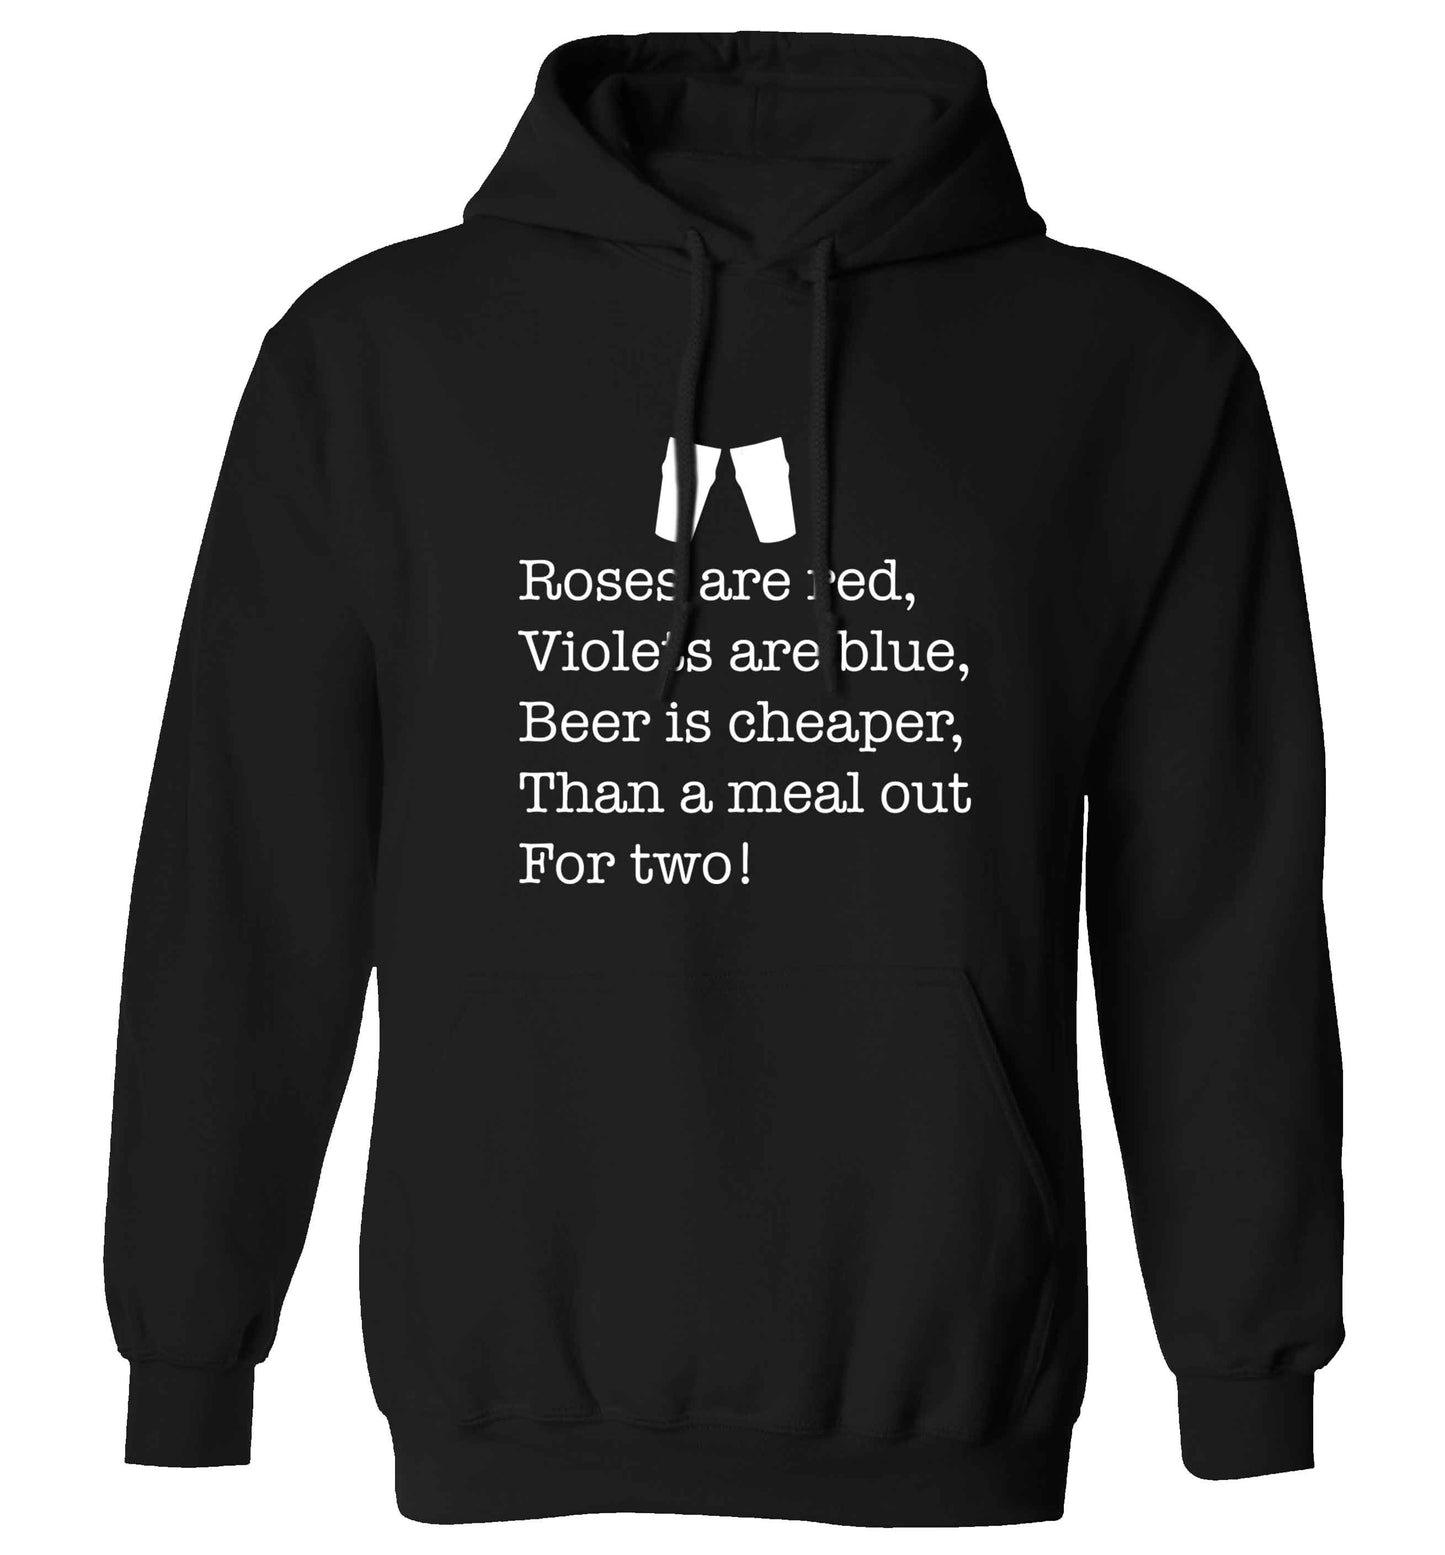 Roses are red violets are blue beer is cheaper than a meal out for two adults unisex black hoodie 2XL